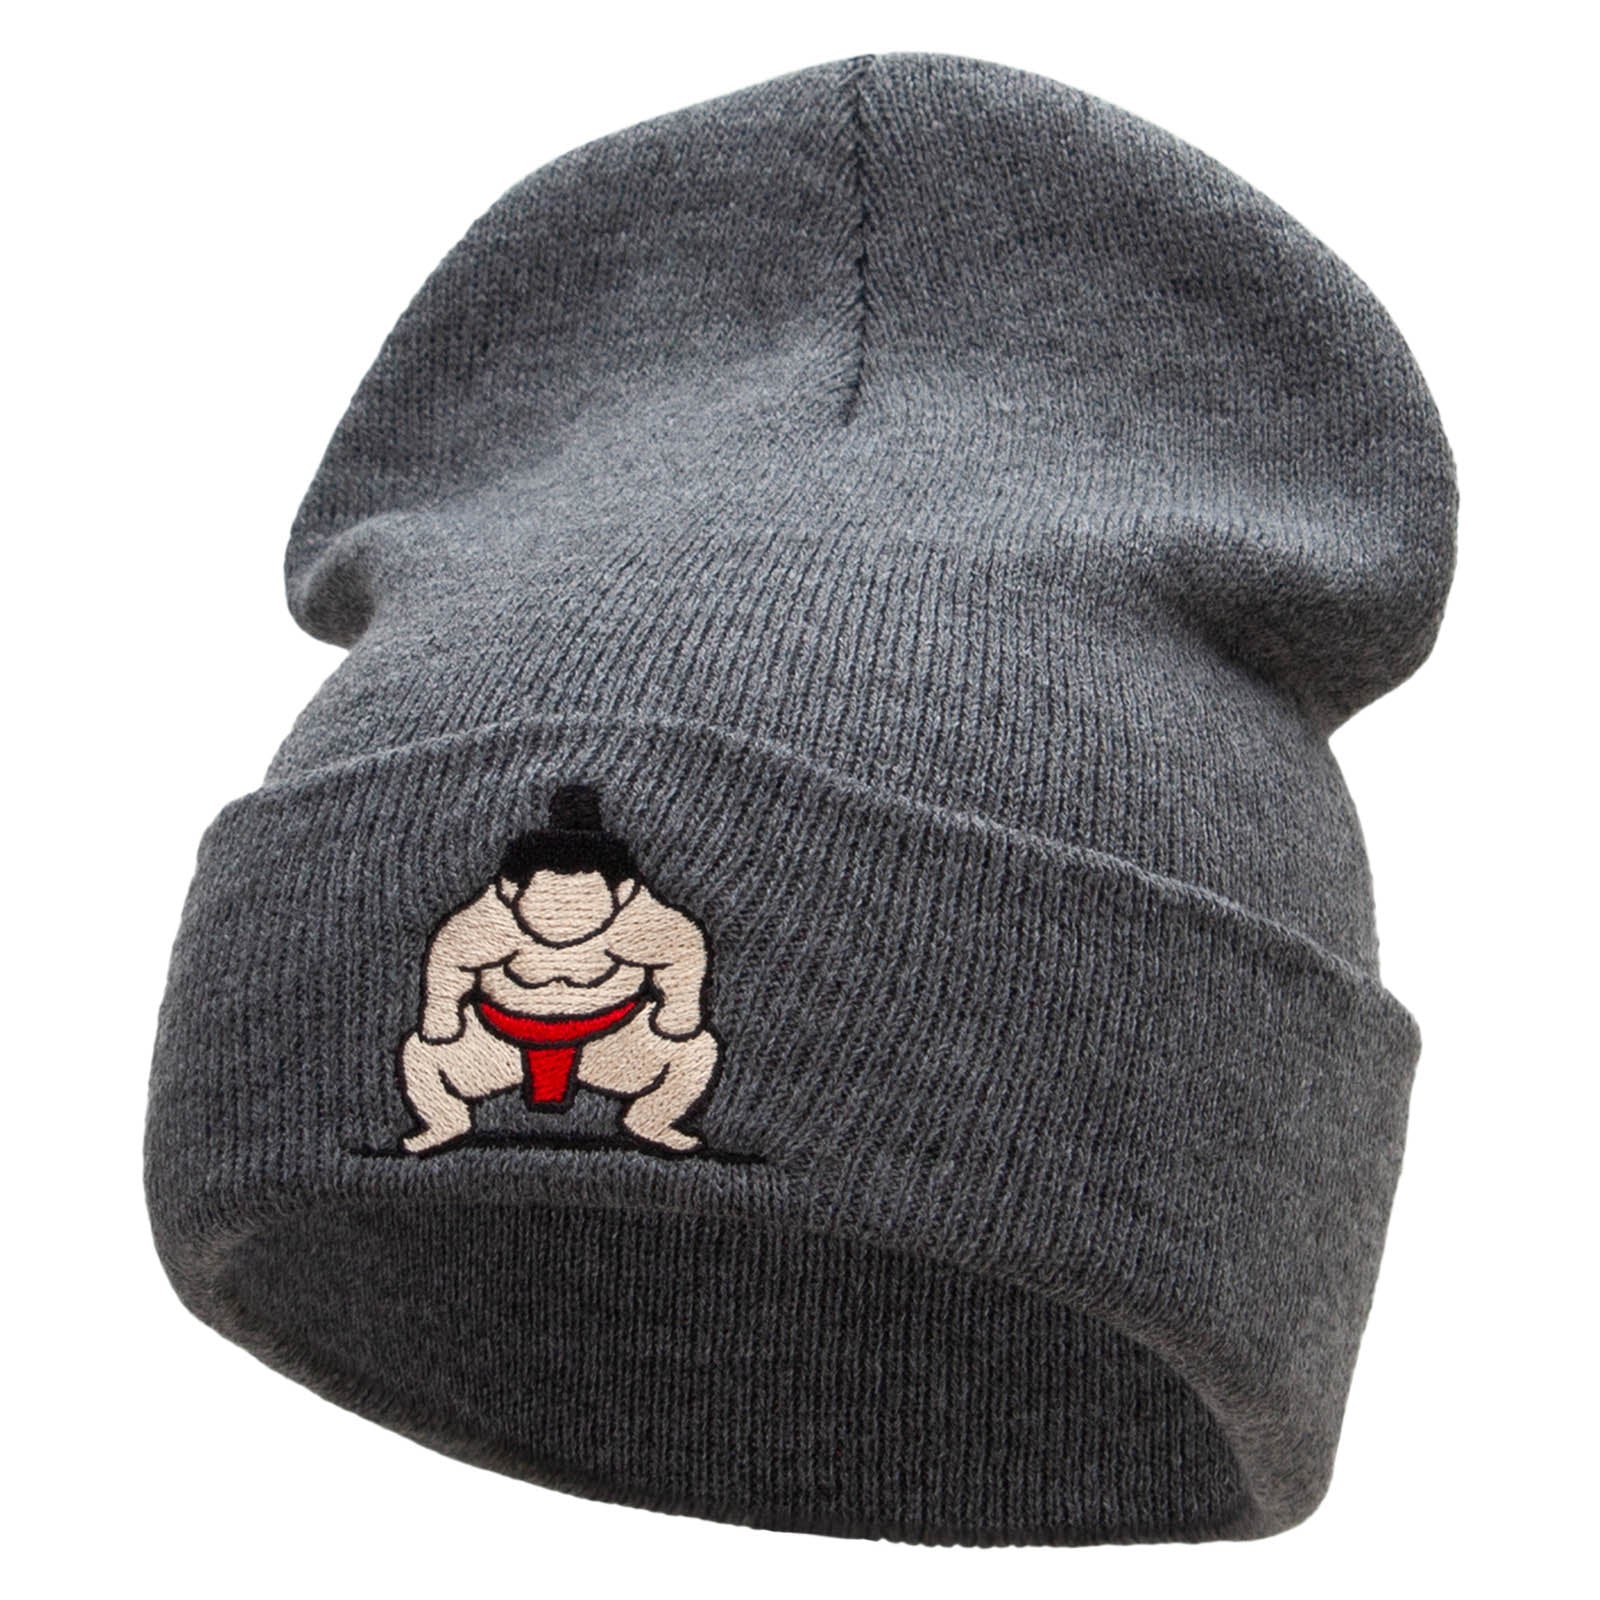 Sumo Embroidered 12 Inch Long Knitted Beanie - Dk Grey OSFM